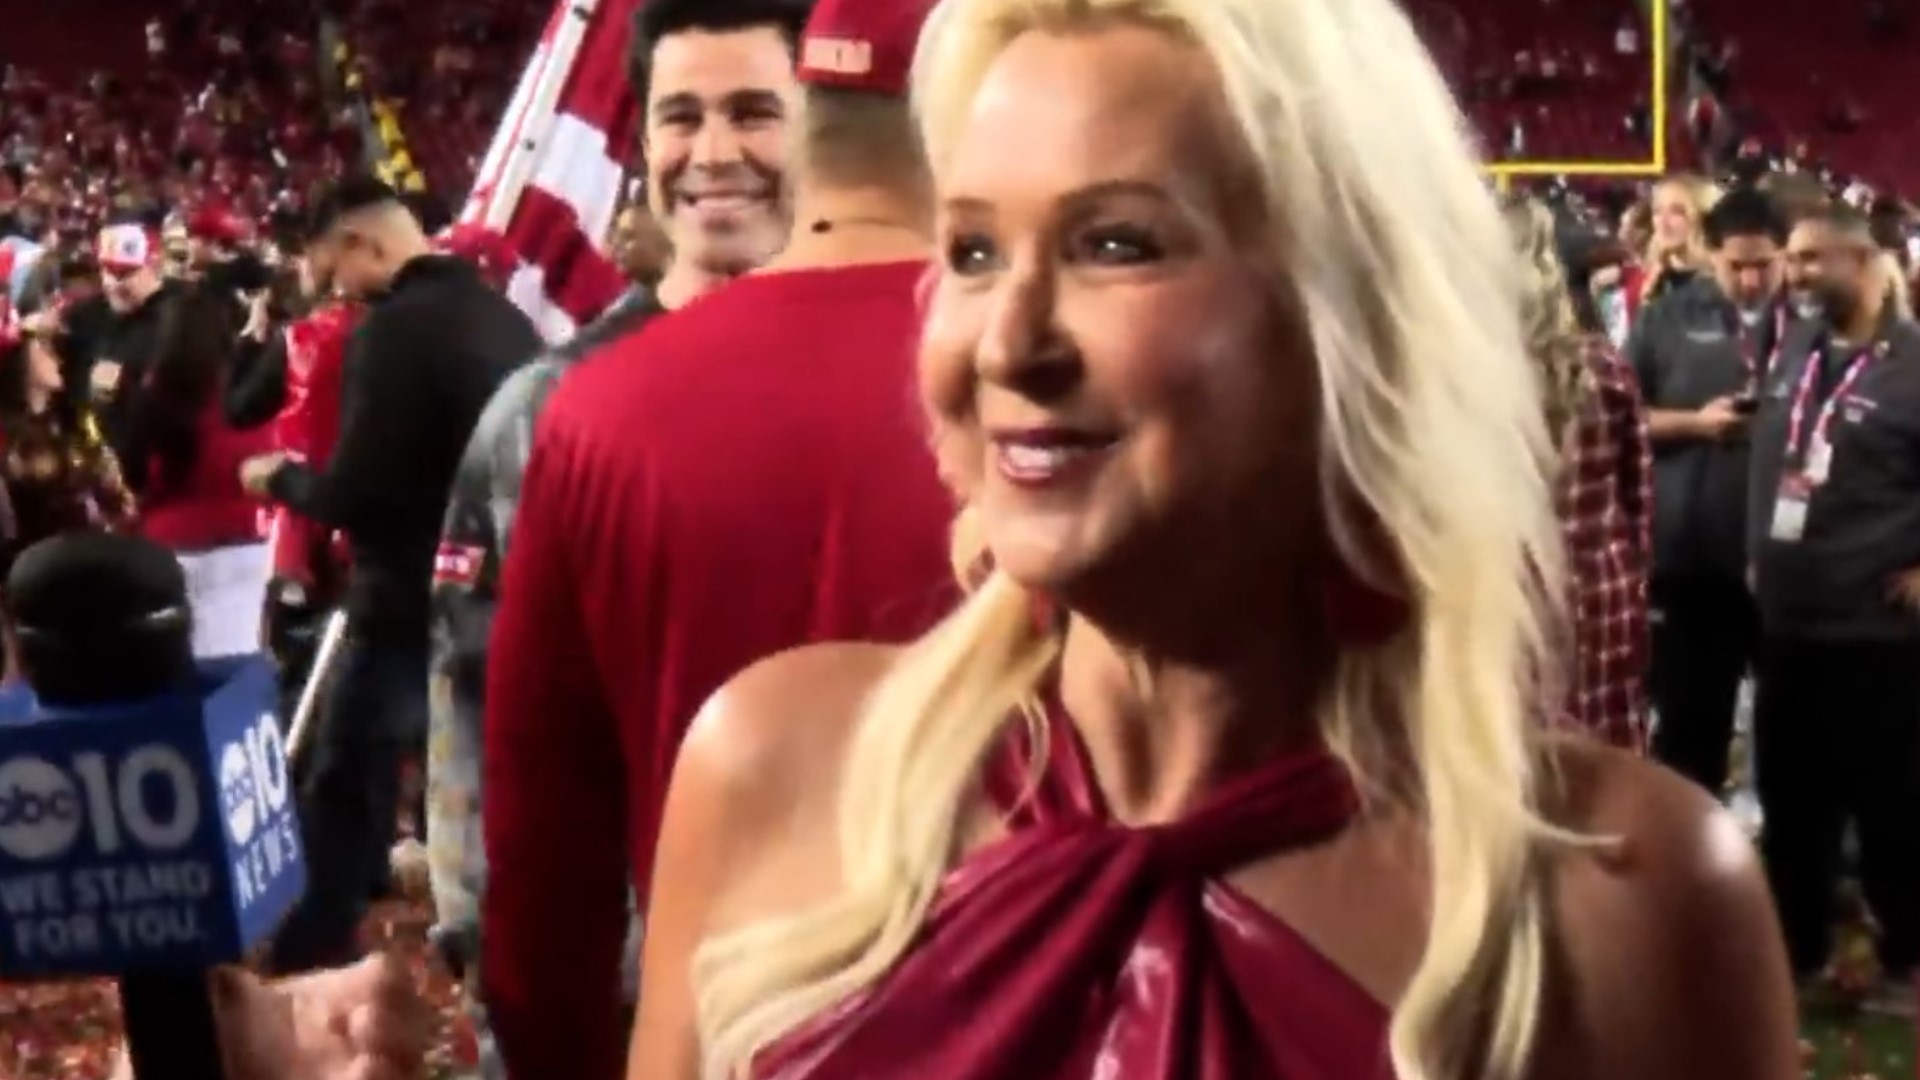 Brock Purdy's mom, Carrie Purdy, speaks out on her son's NFC title win and Super Bowl-bound 49ers.